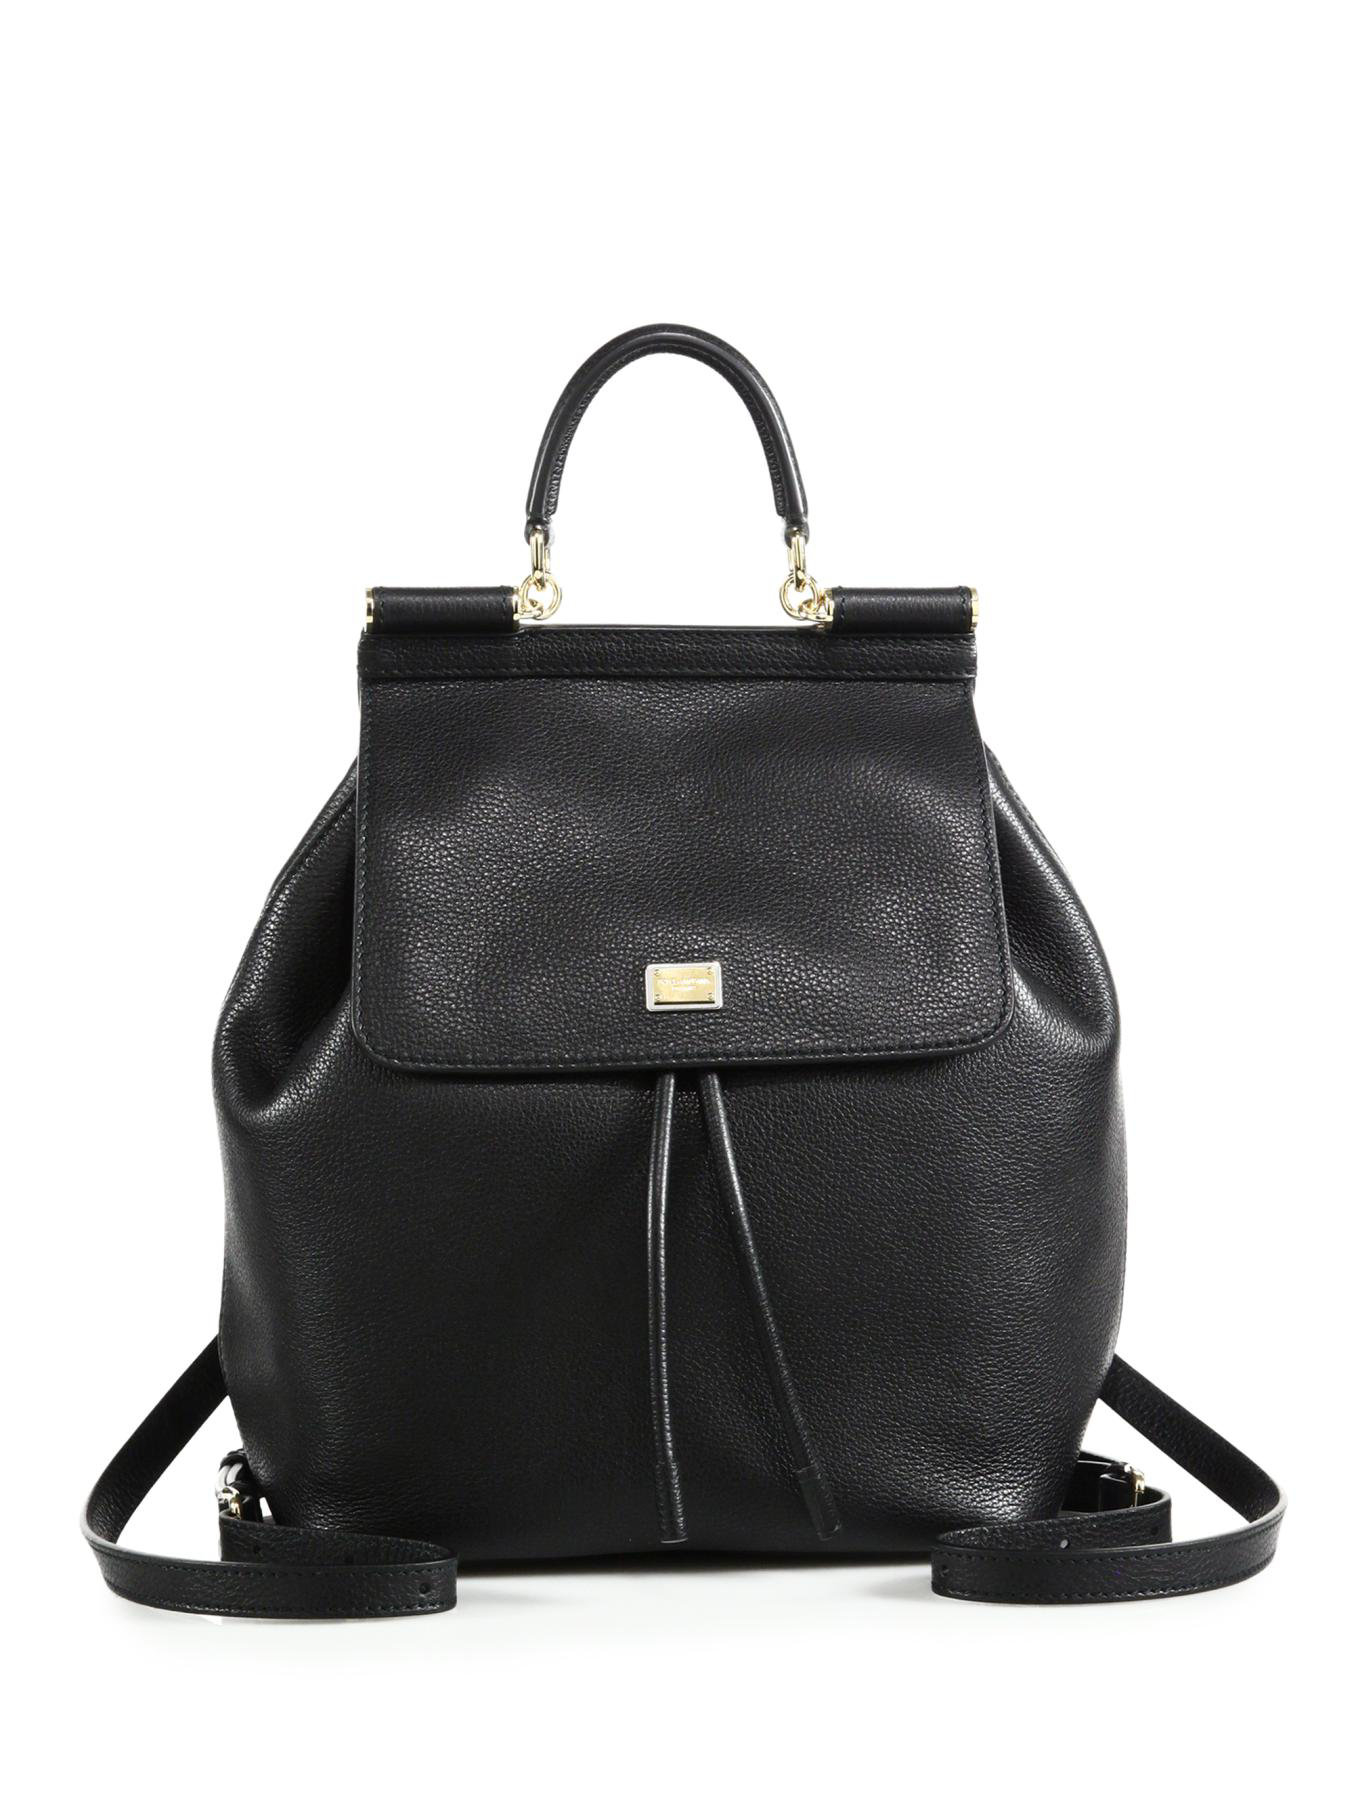 Dolce & Gabbana Sicily Leather Backpack in Black - Lyst